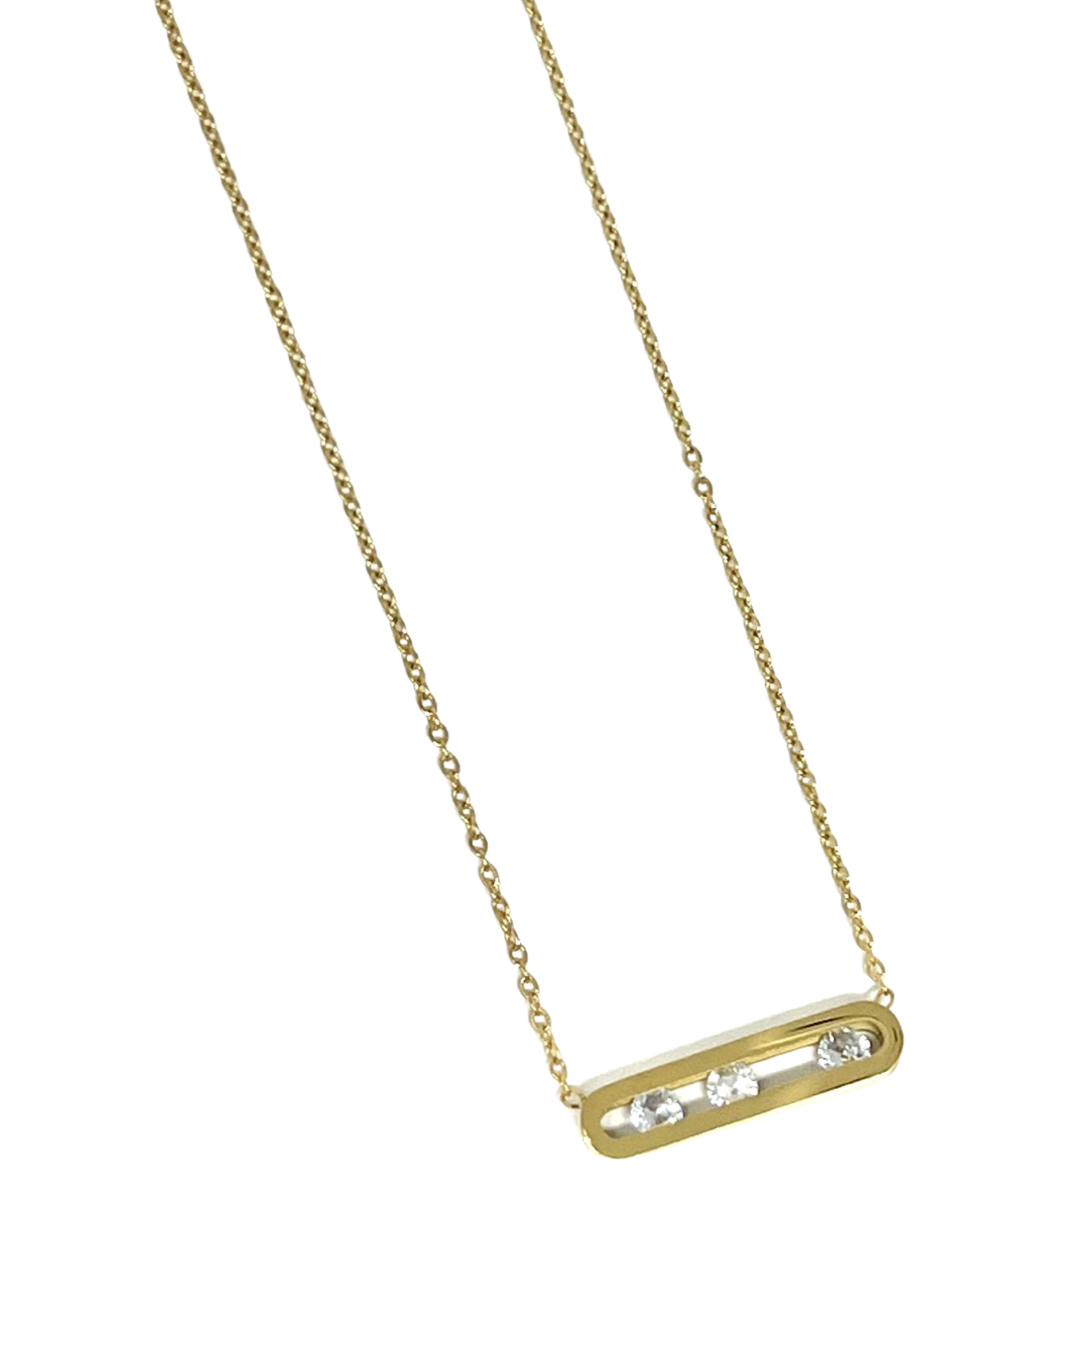 Rebecca Stones Necklace in Gold